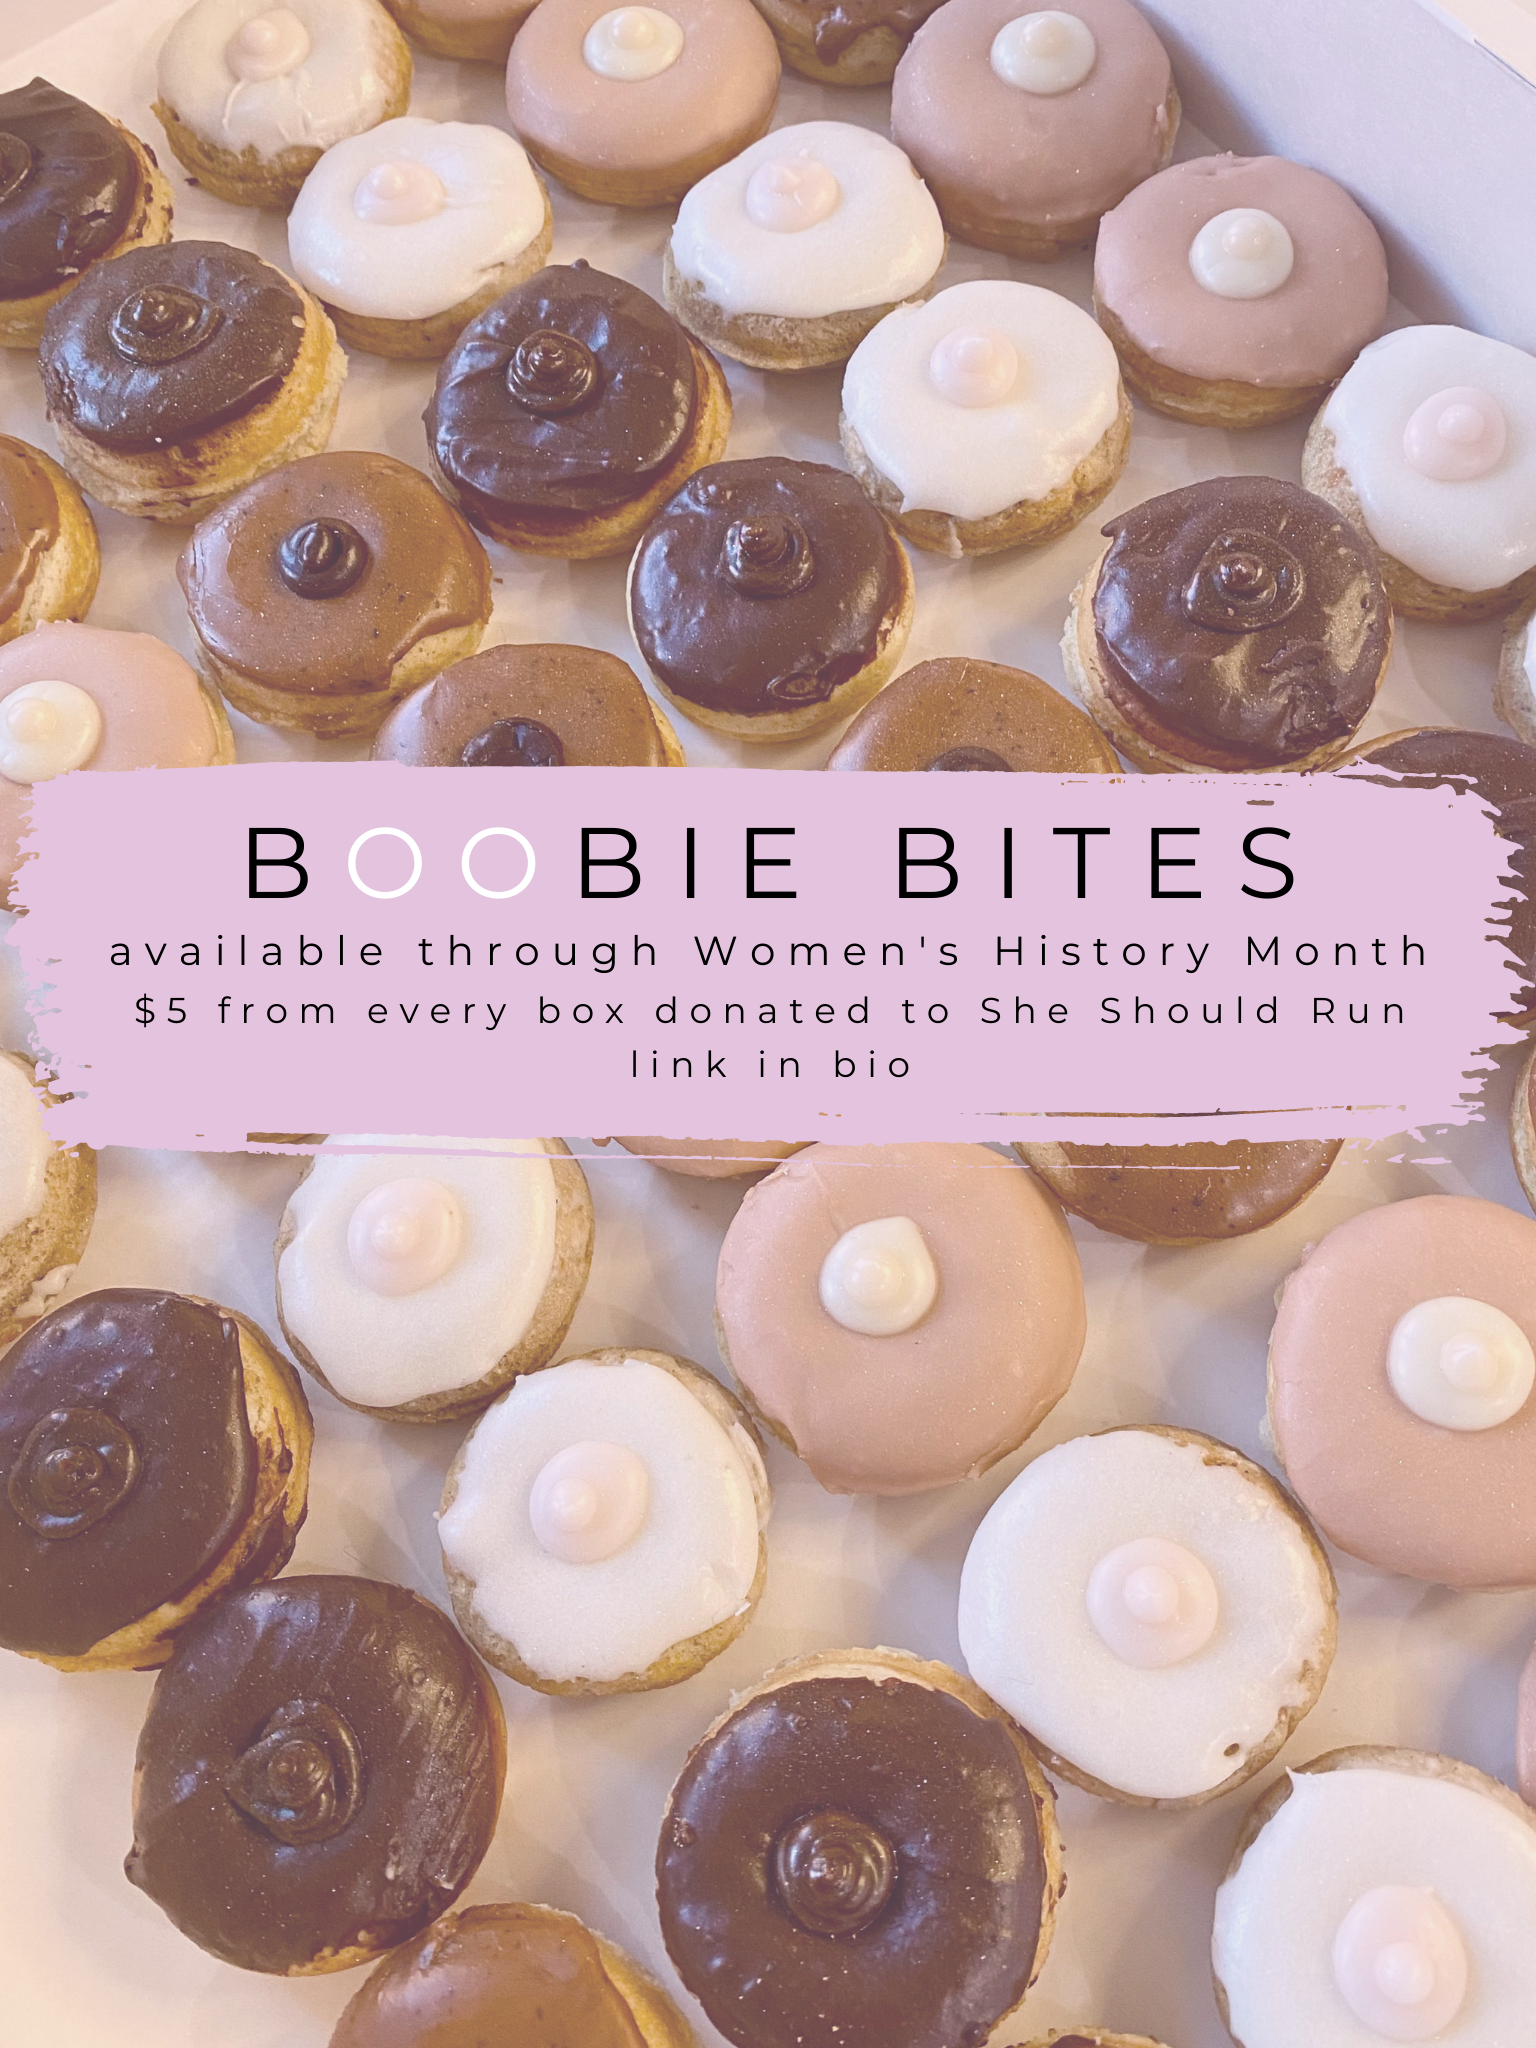 Boobie Bites are now widely available!